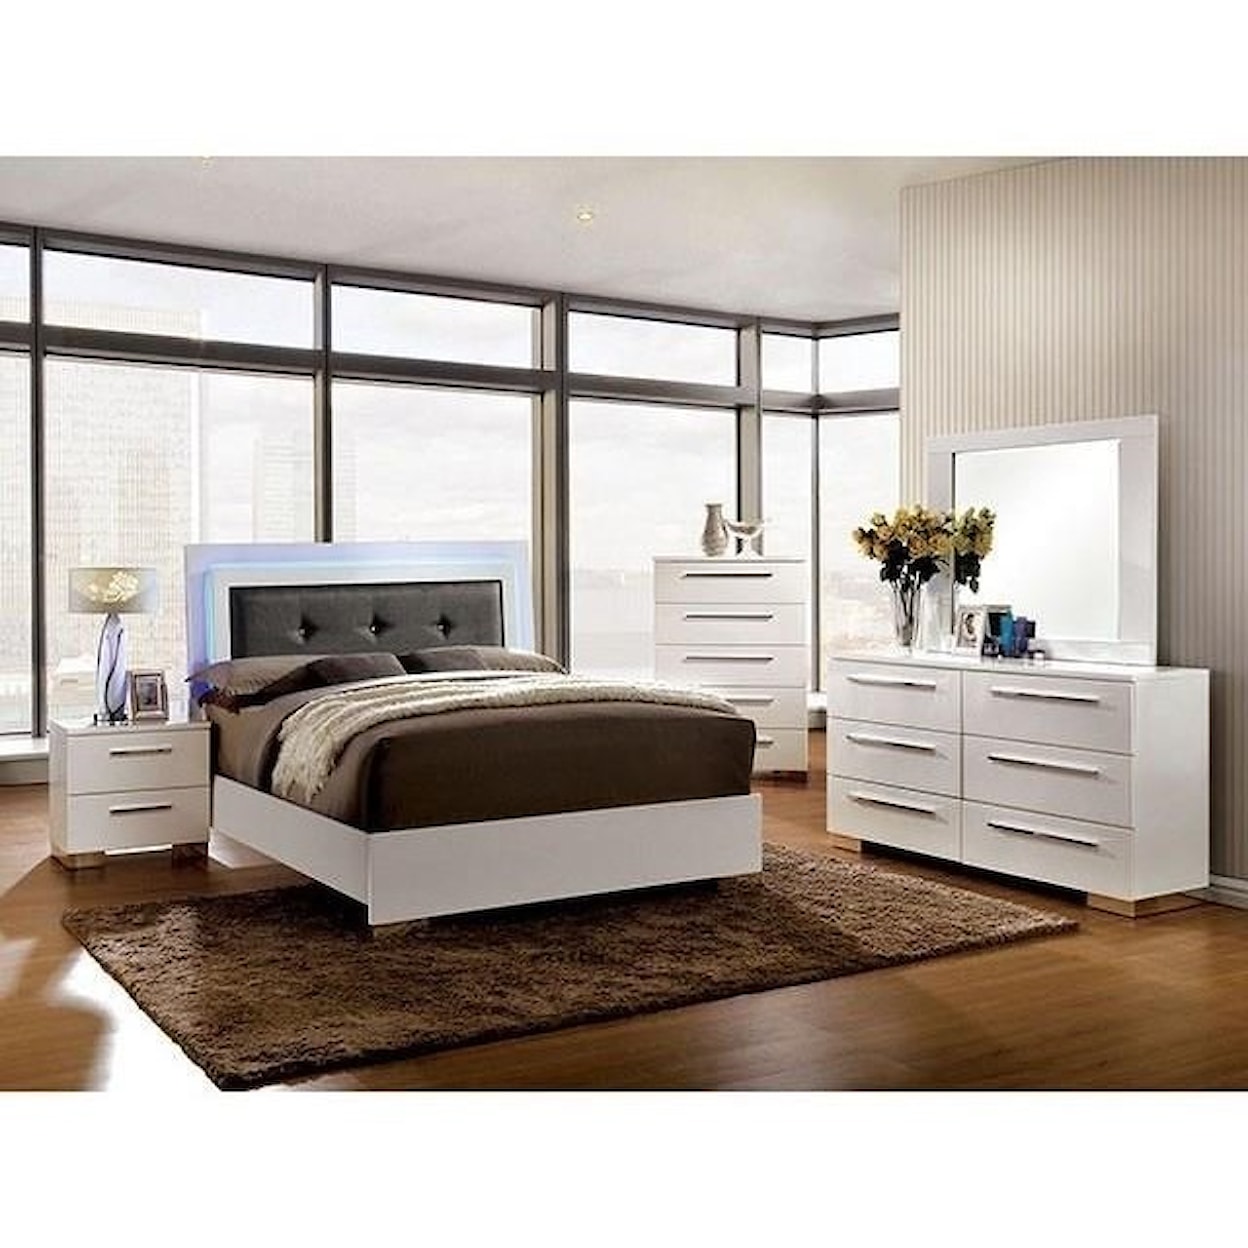 Furniture of America Clementine King Bed